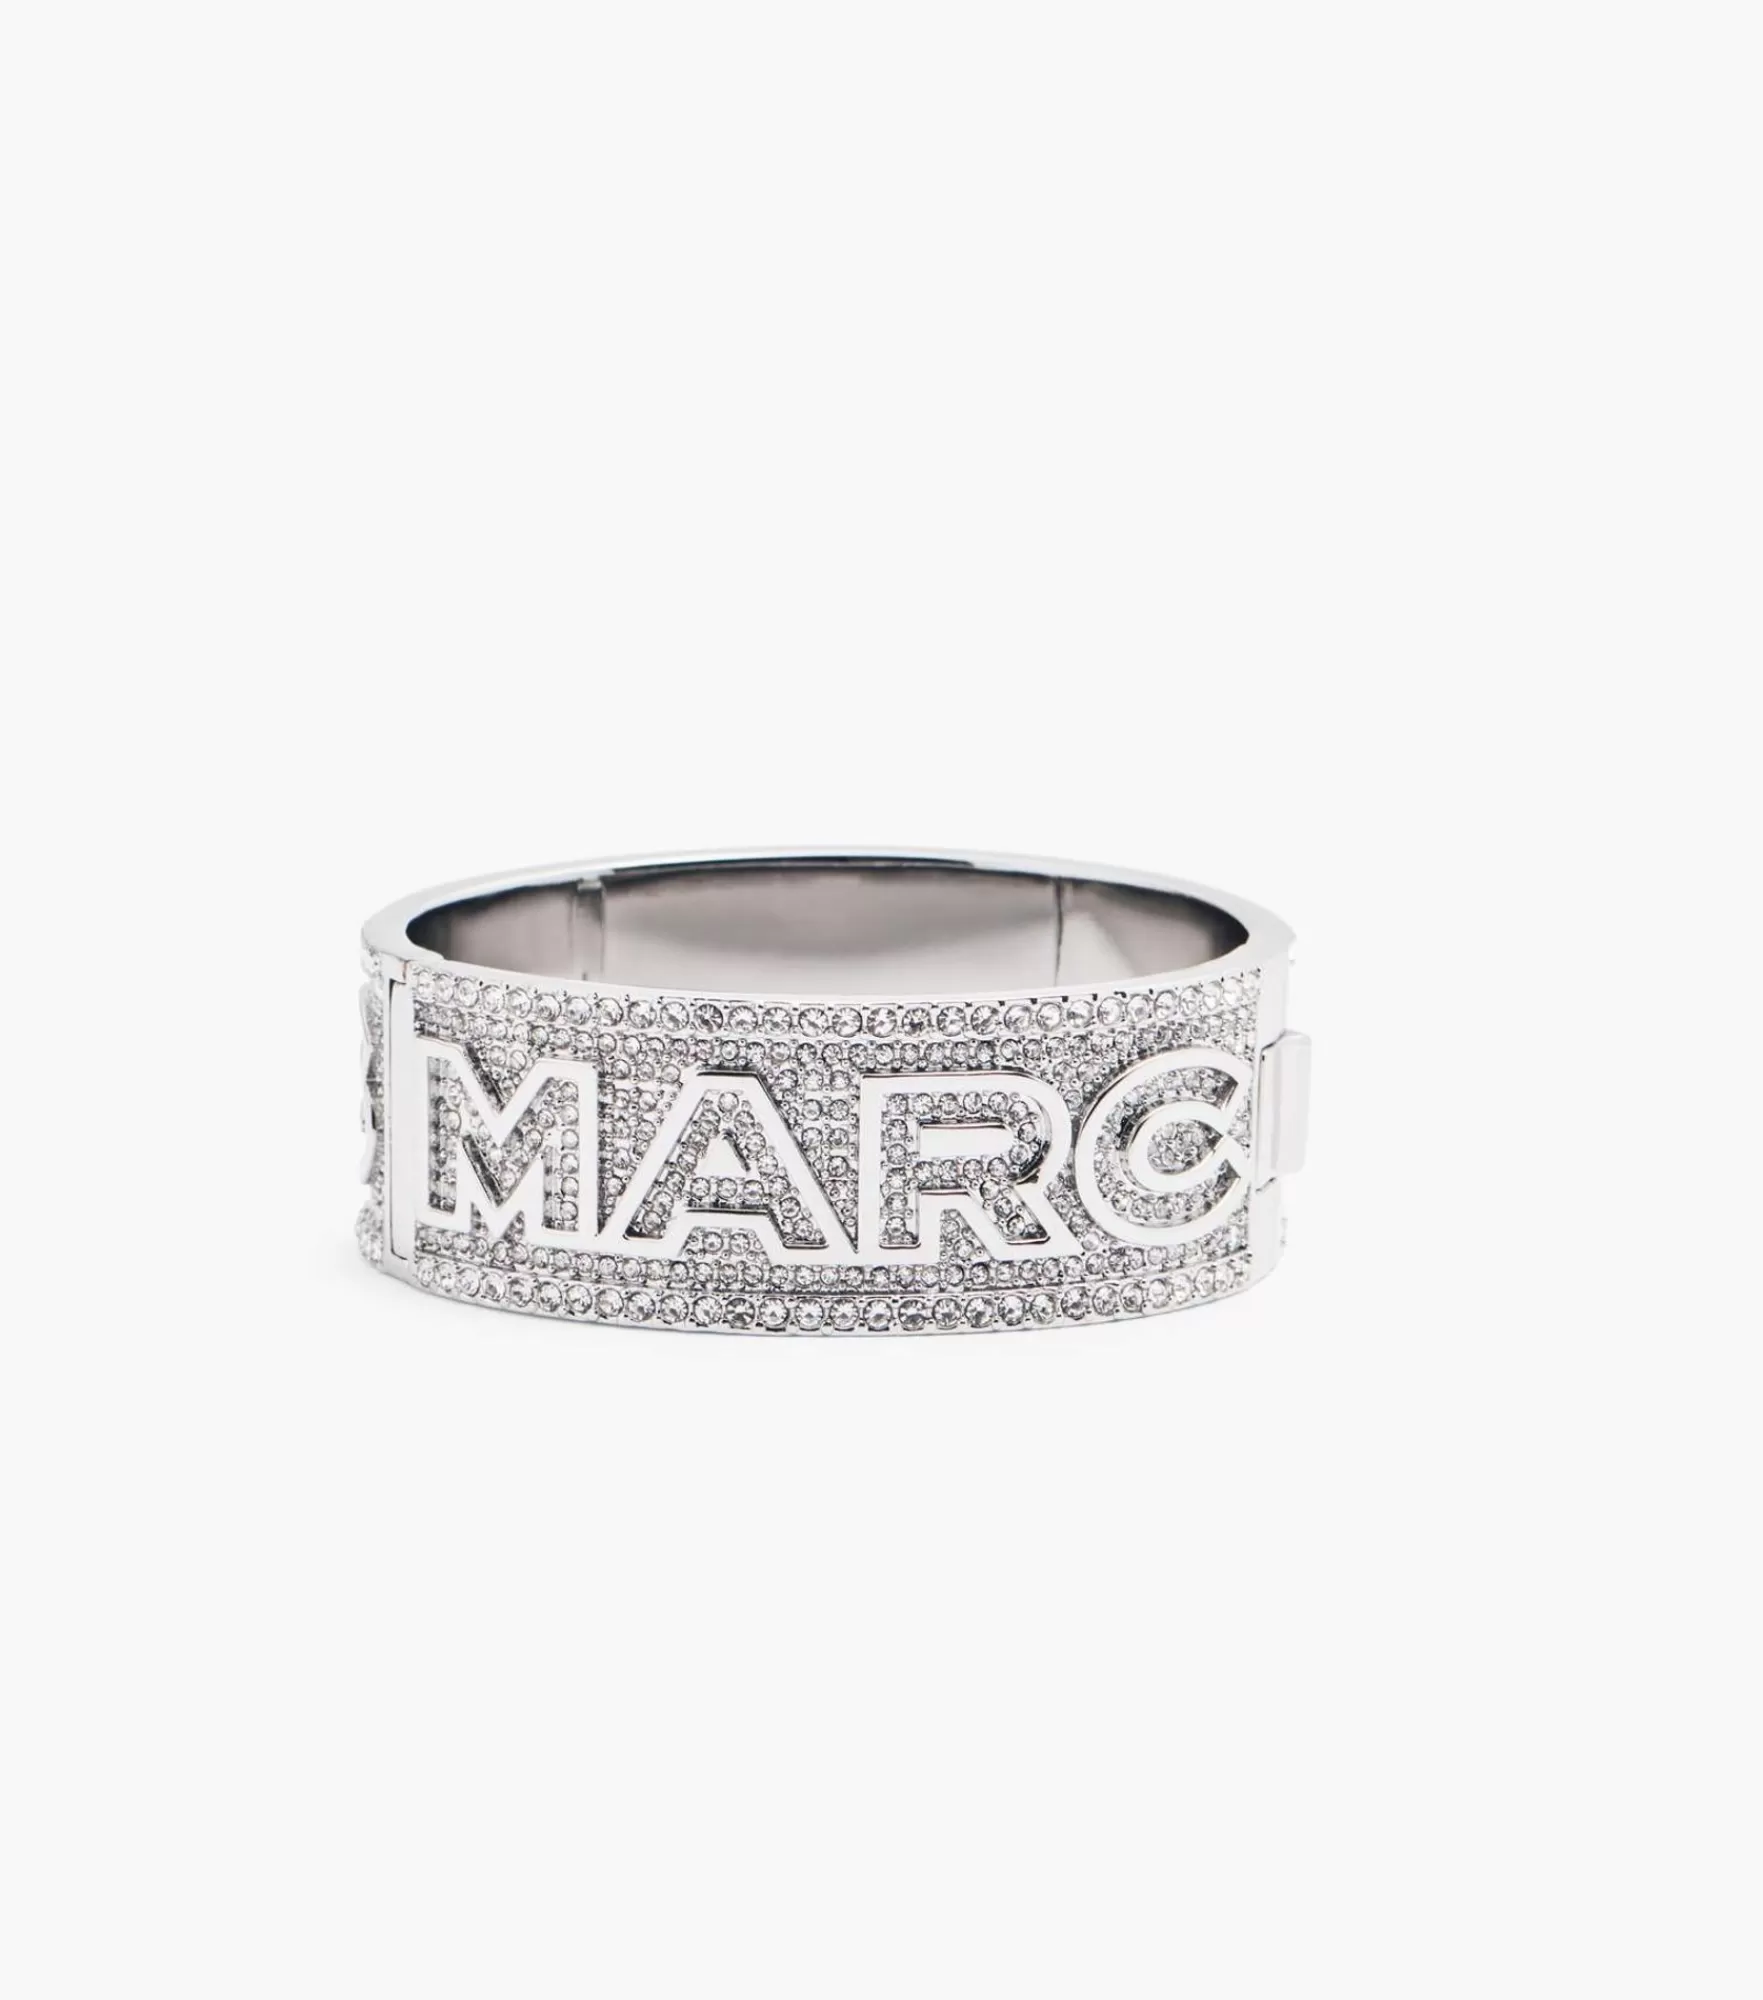 Marc Jacobs The Monogram Pave Cuff Bracelet | The Monogram Collection